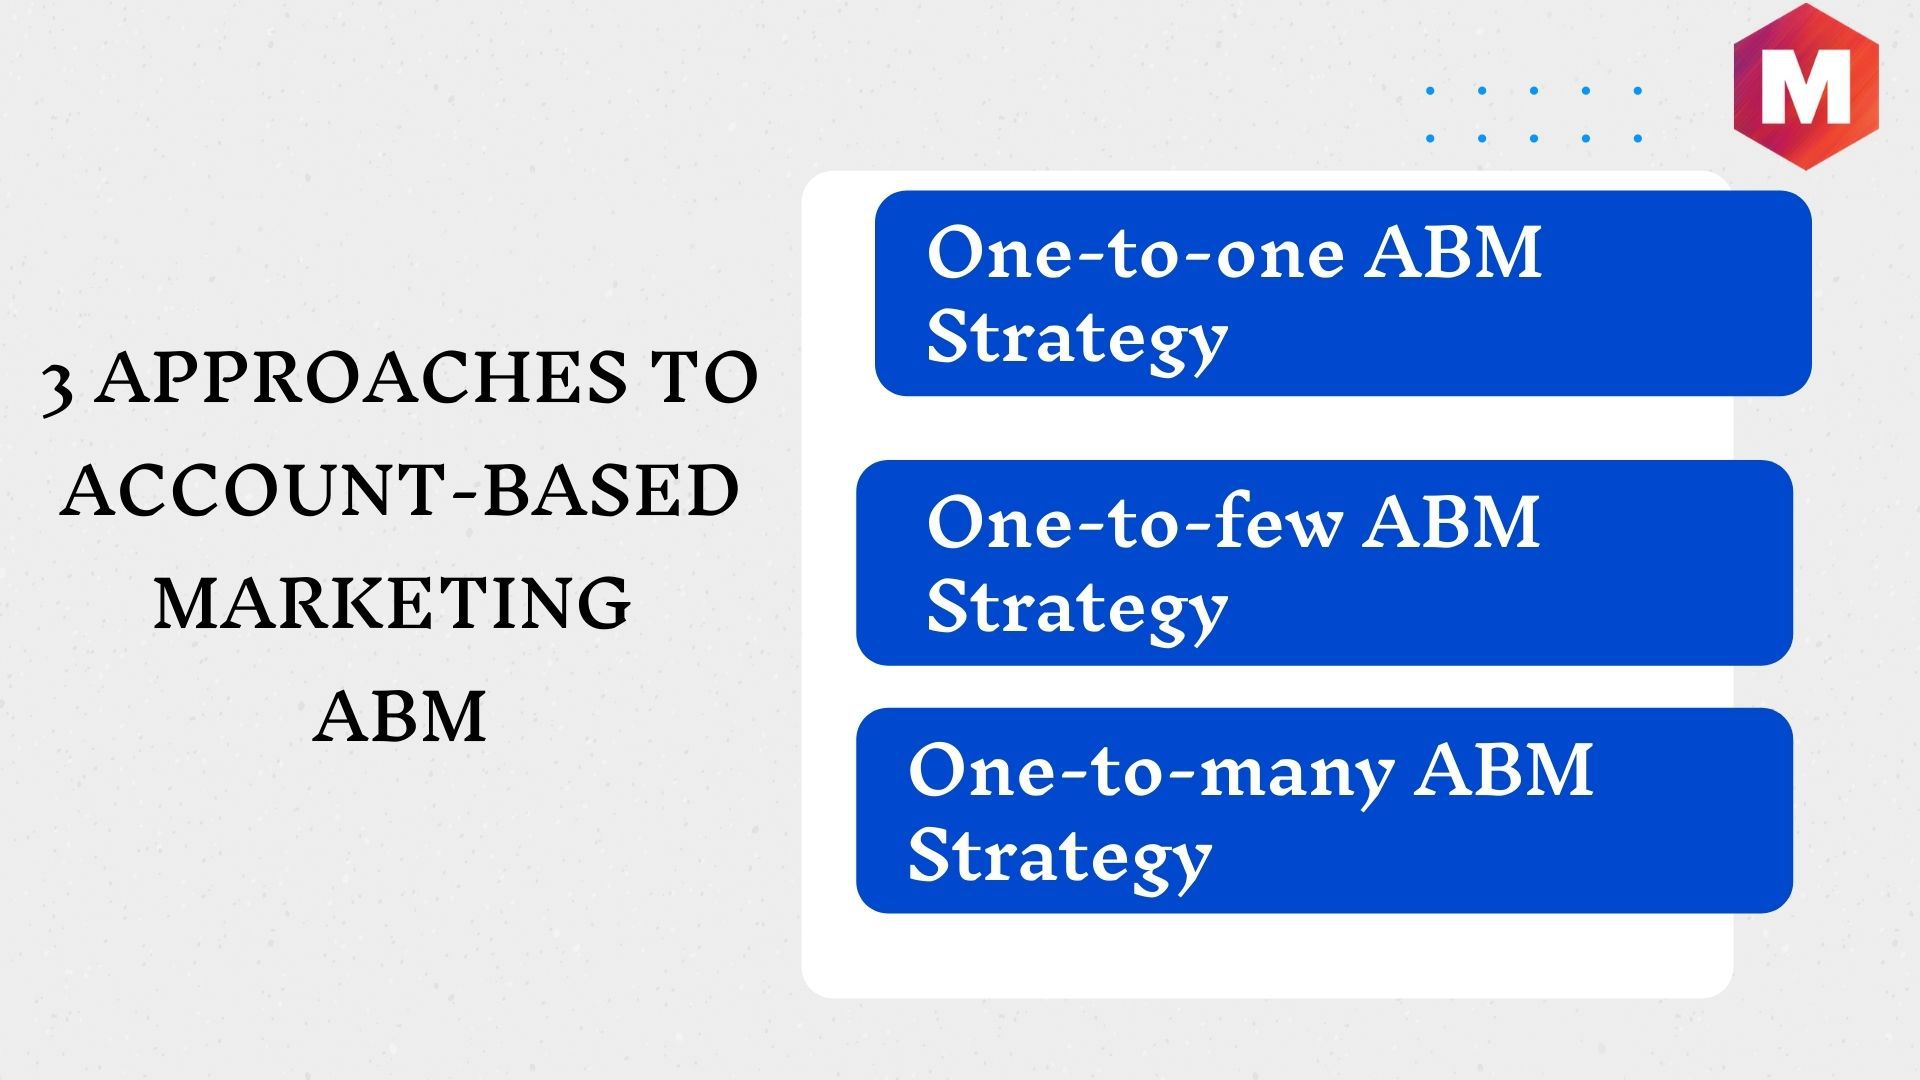 3 approaches to Account-based Marketing ABM